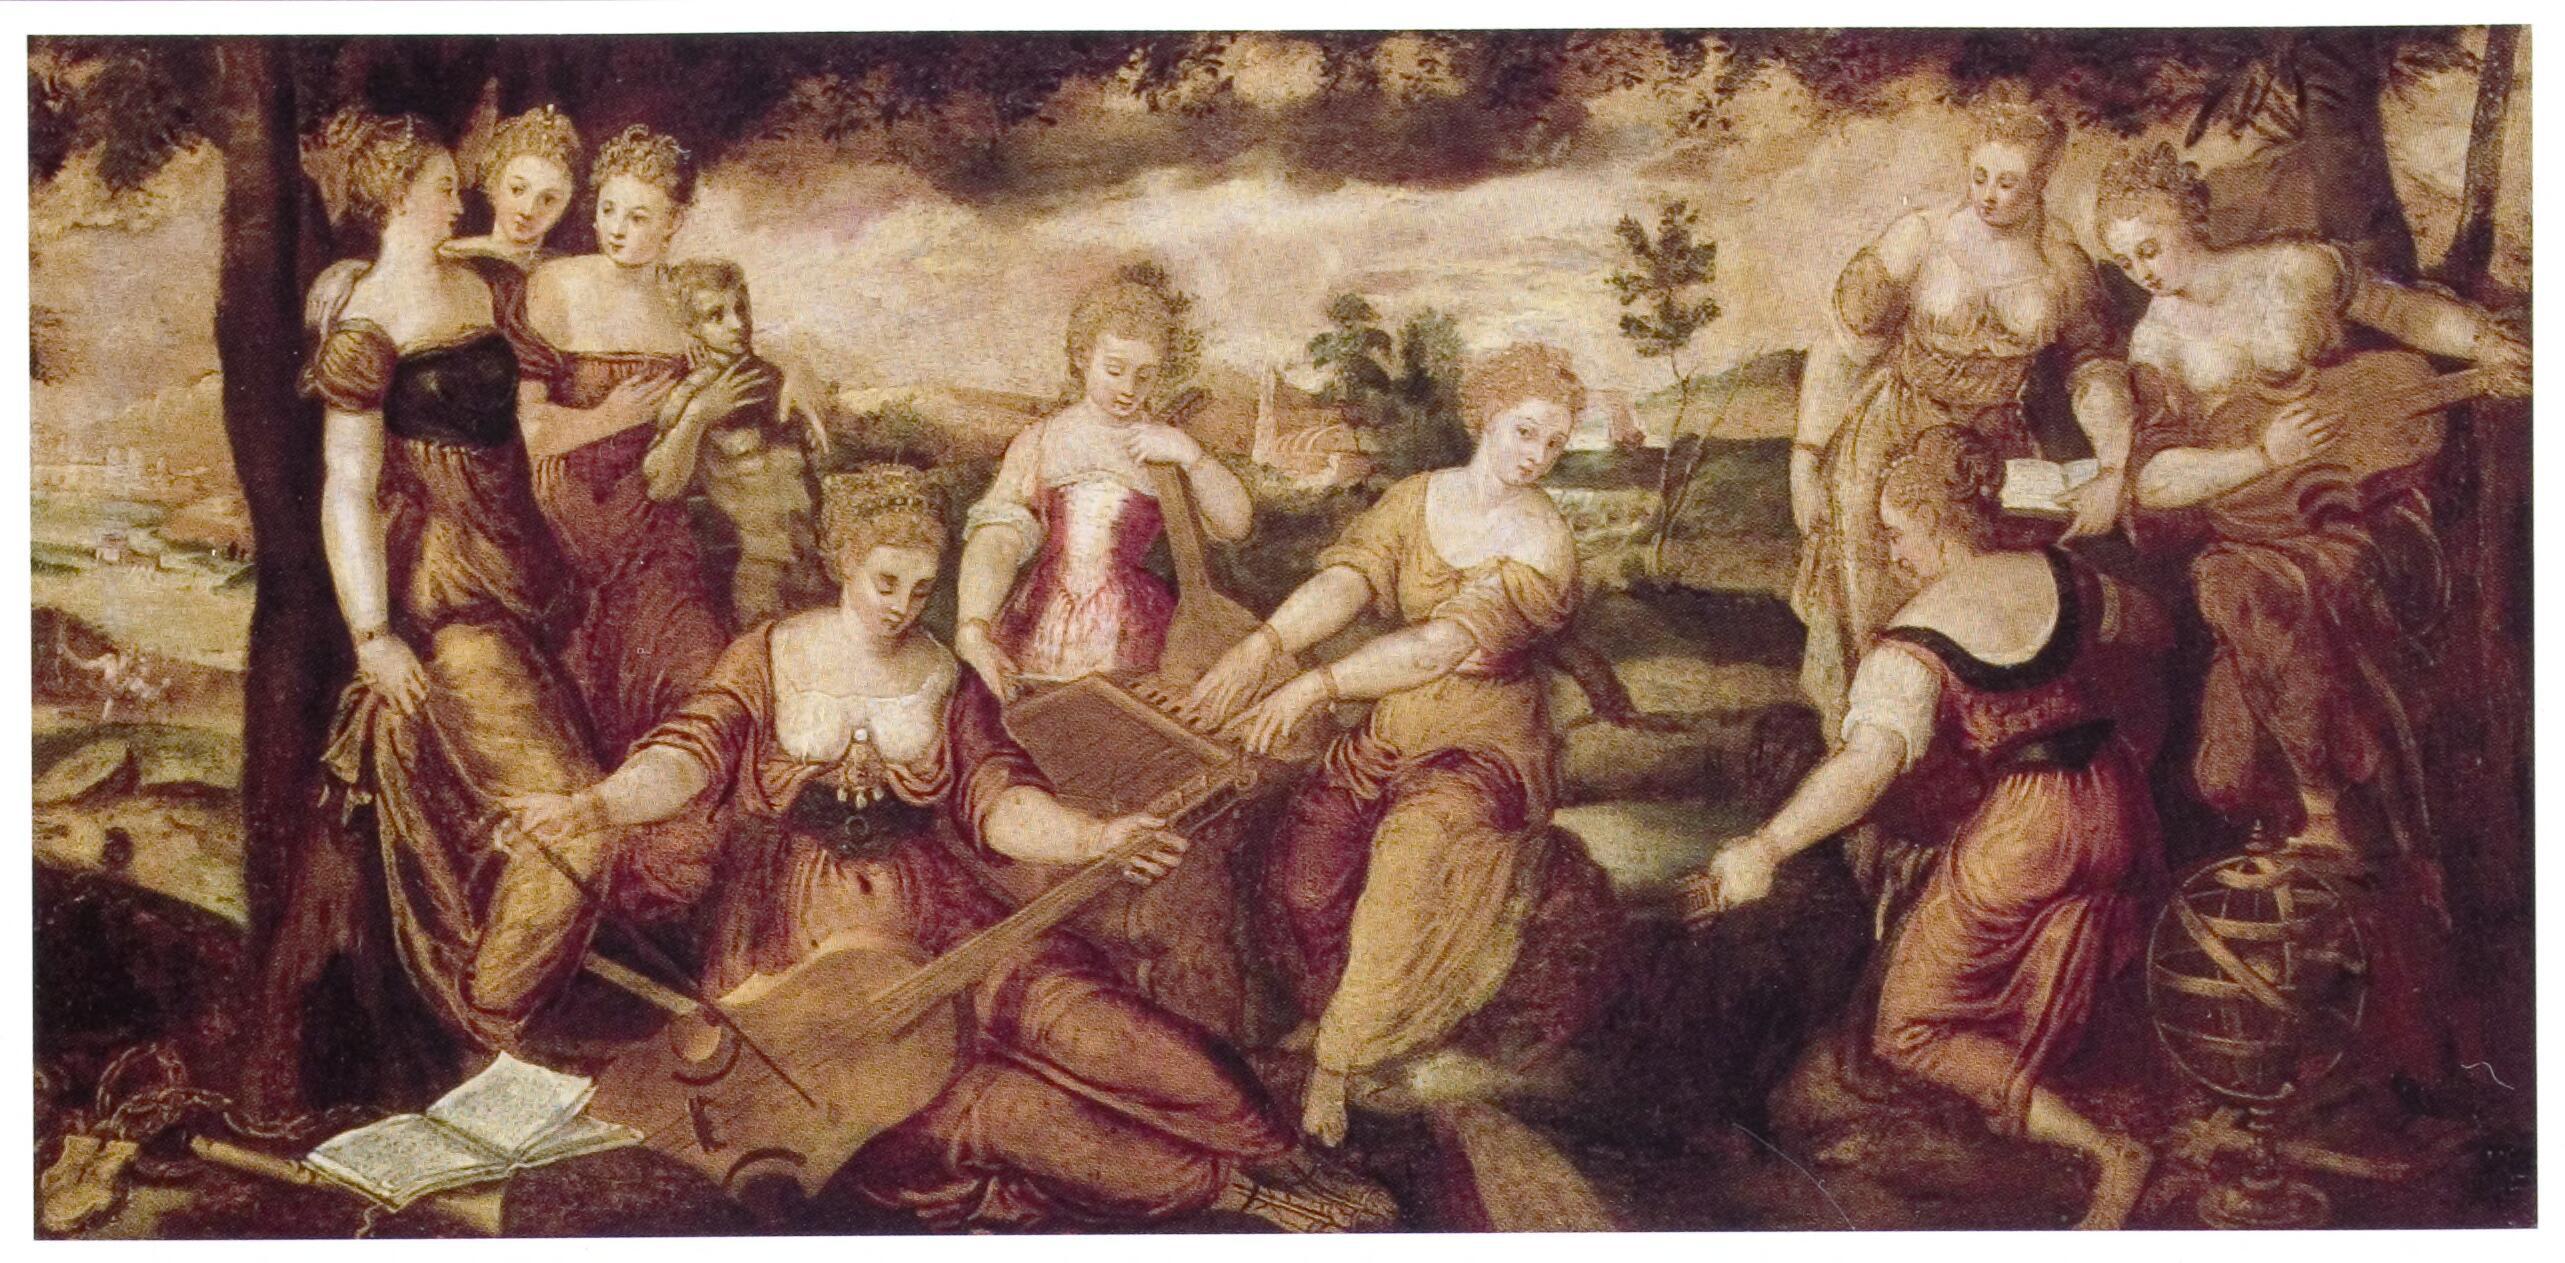 Another painting of the Muses of Greek mythology